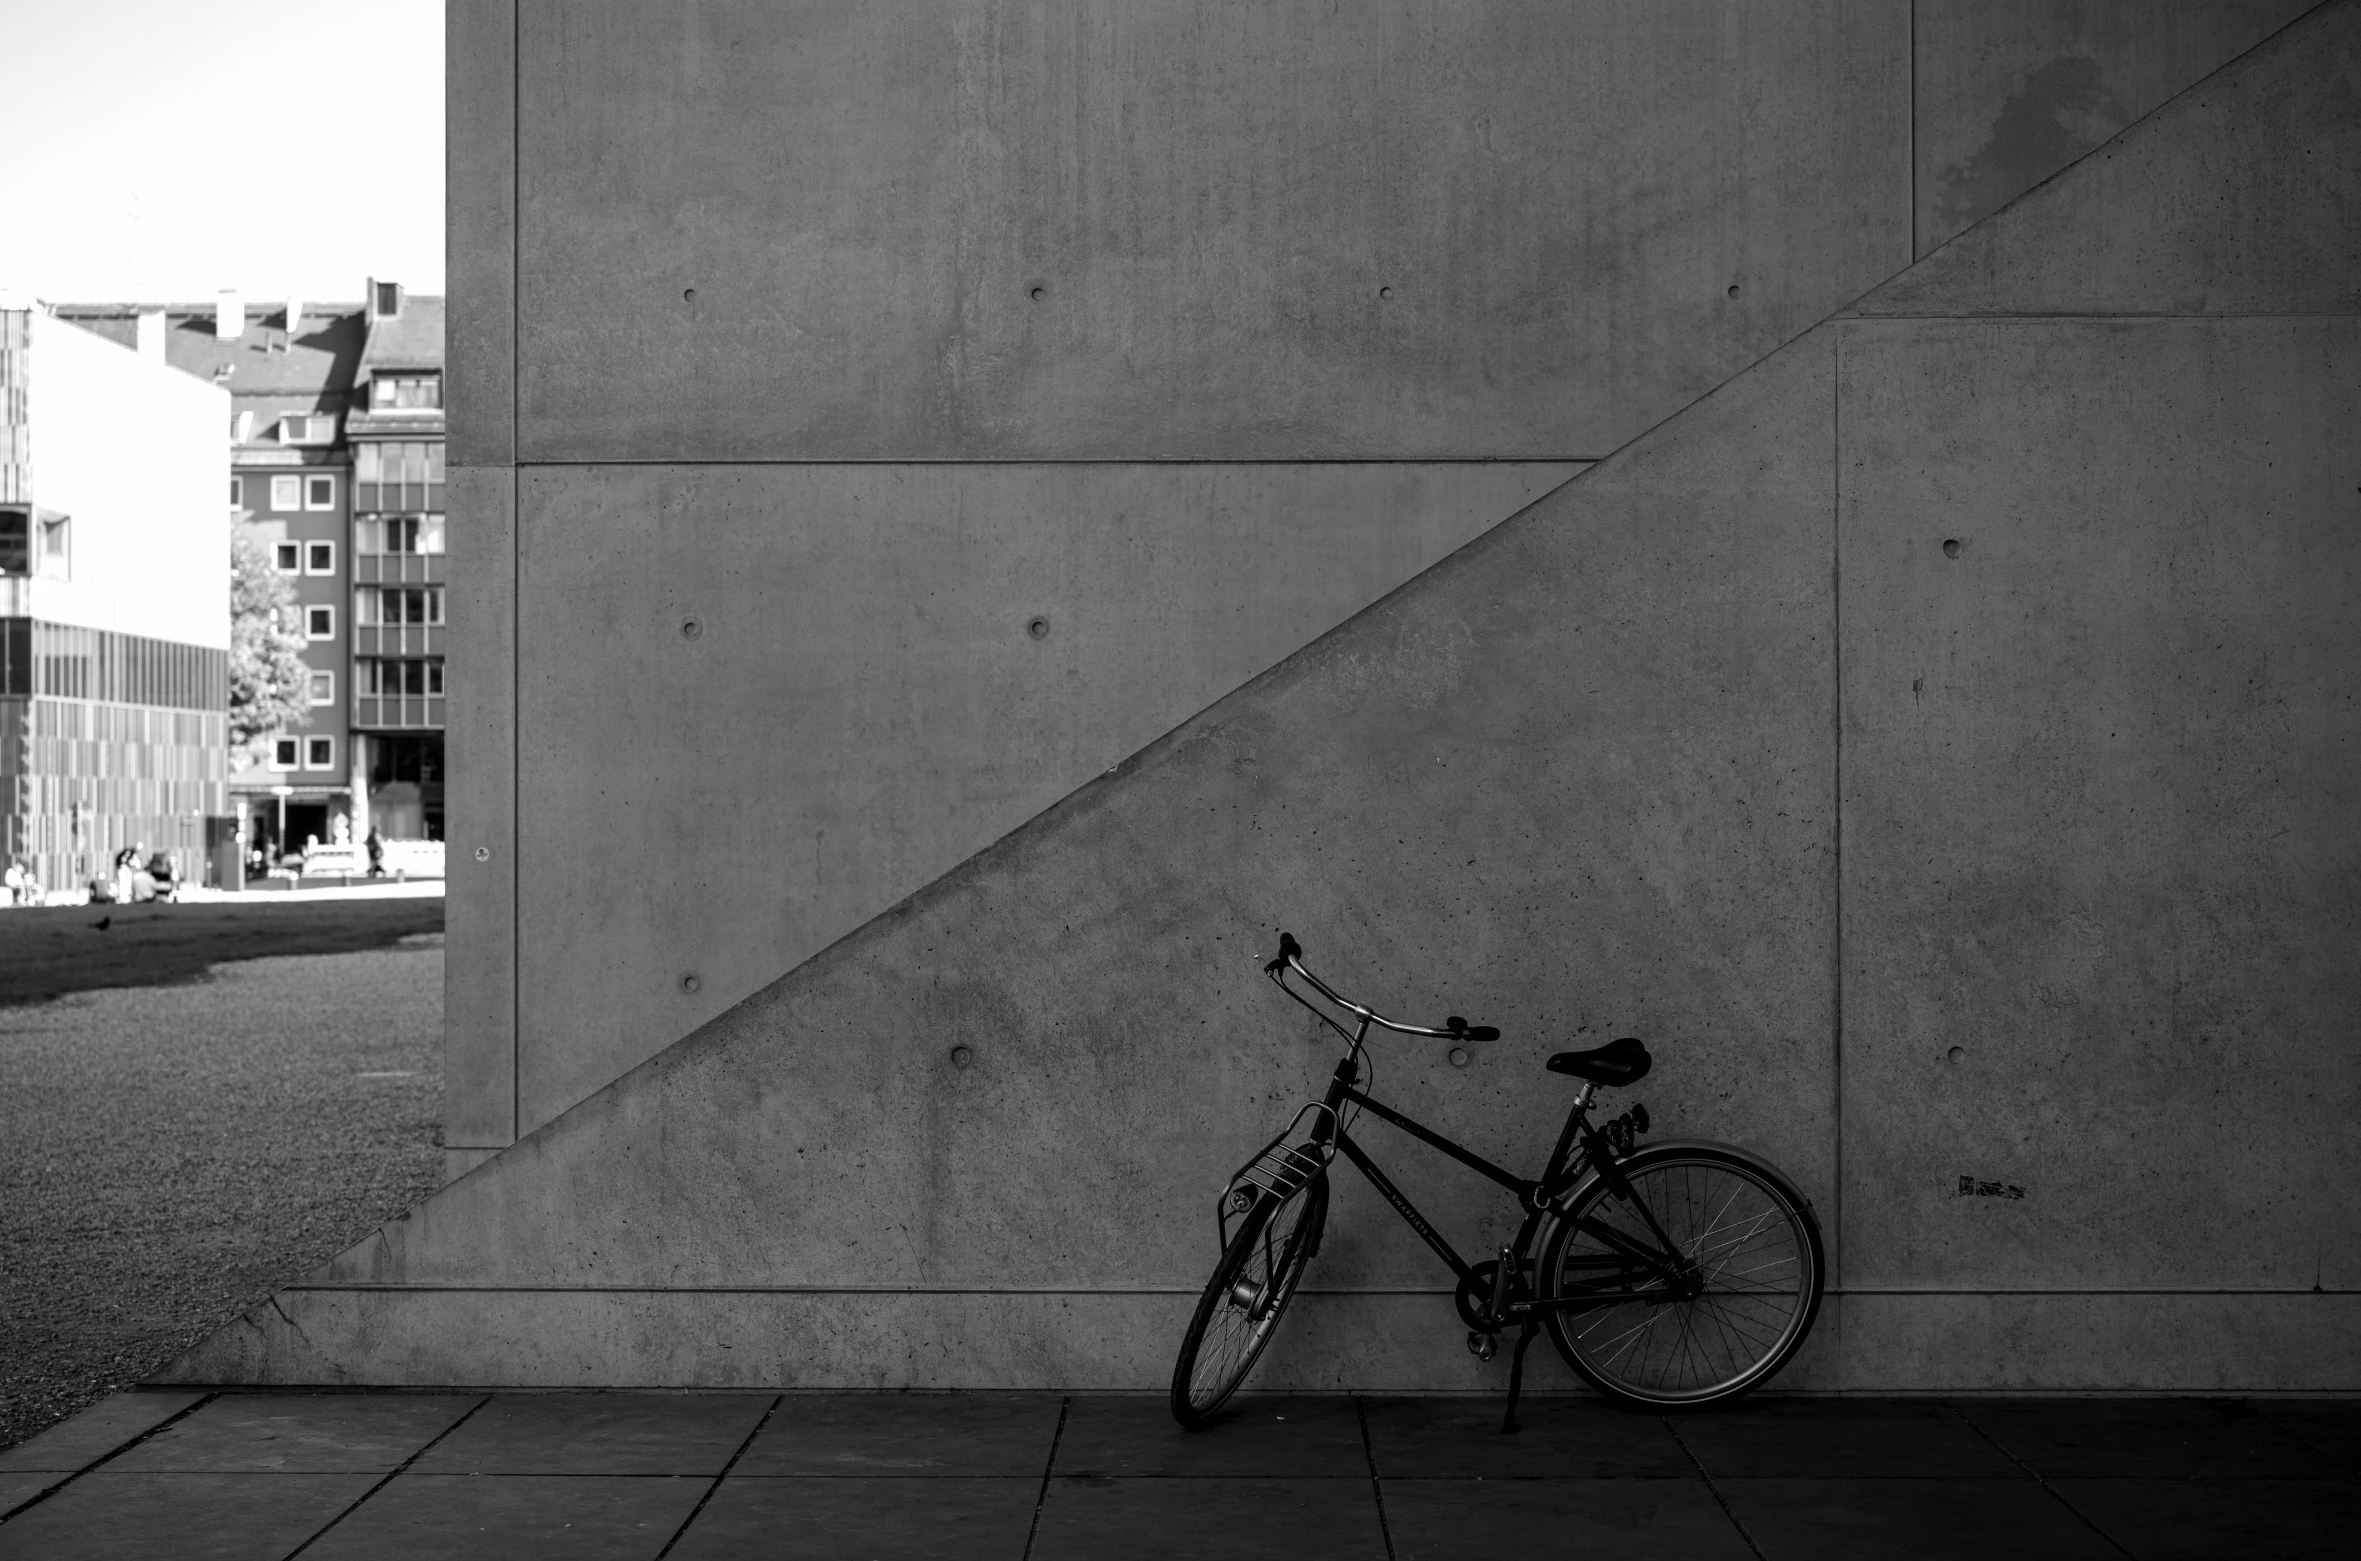 a bicycle leaning against the wall in a city